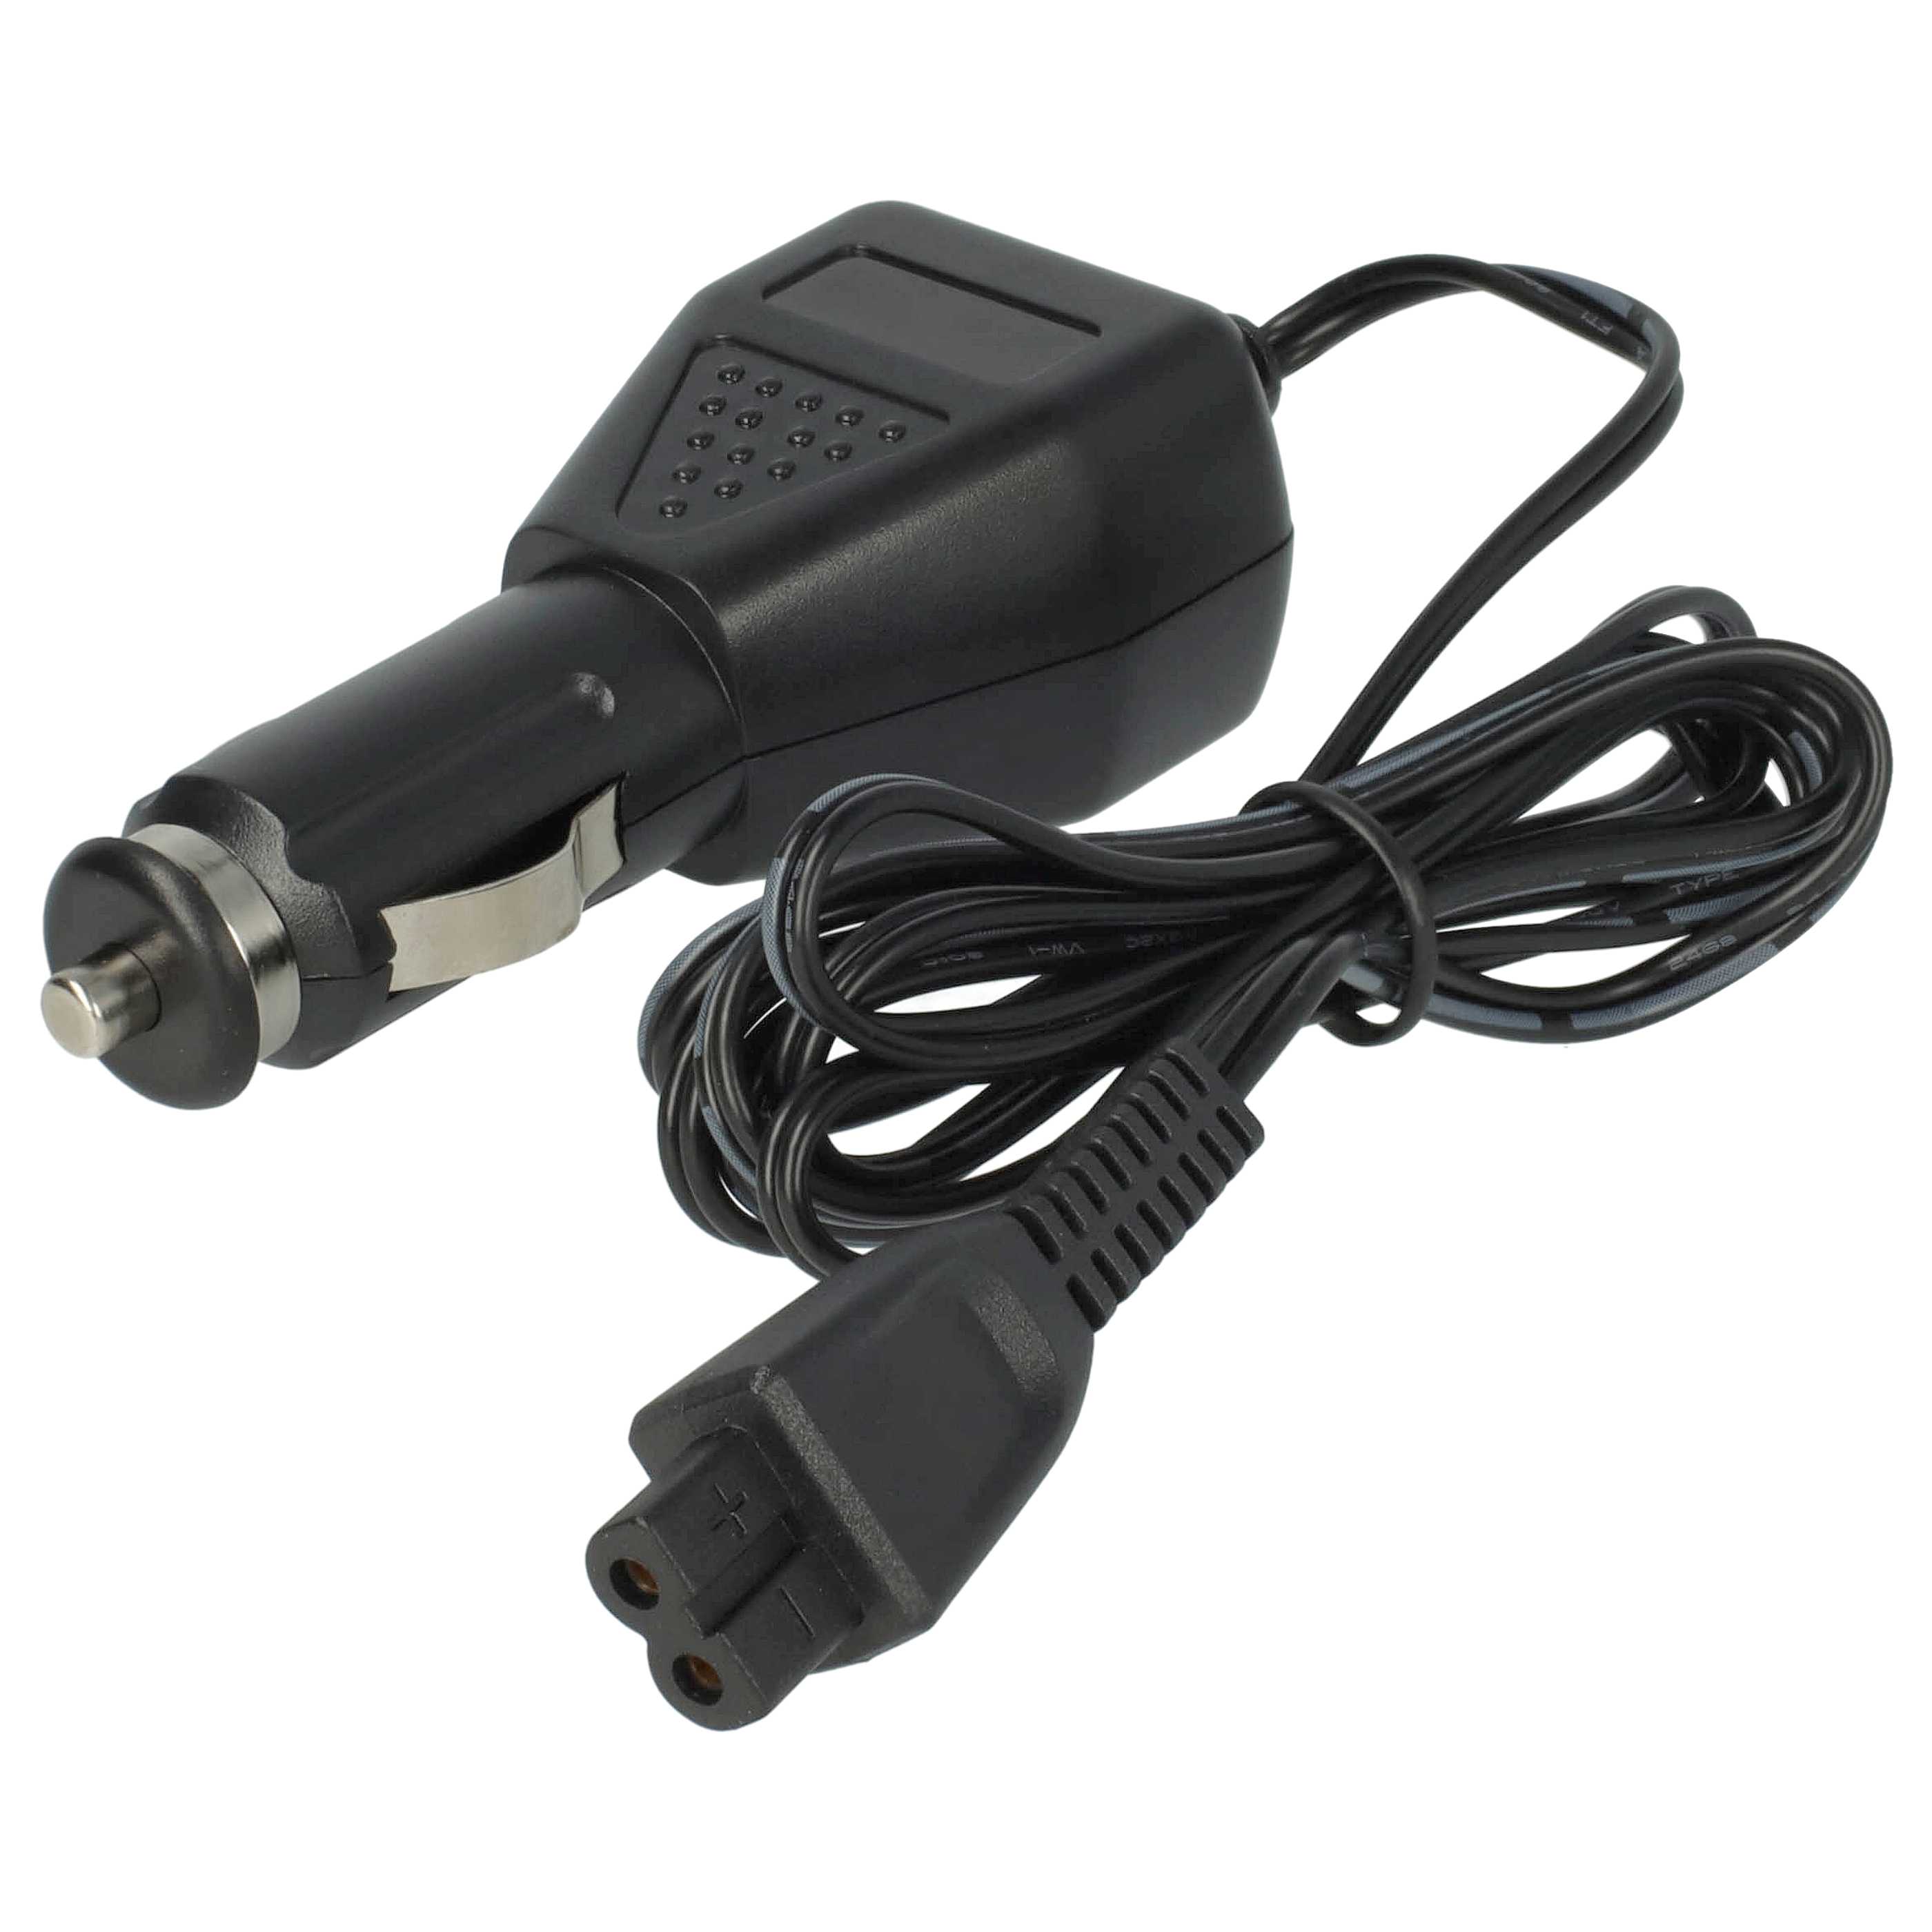 Vehicle Charger replaces Kärcher 2.643-876.0 for KärcherPressure Cleaner, Ice Scraper - 12 V In Car Charger